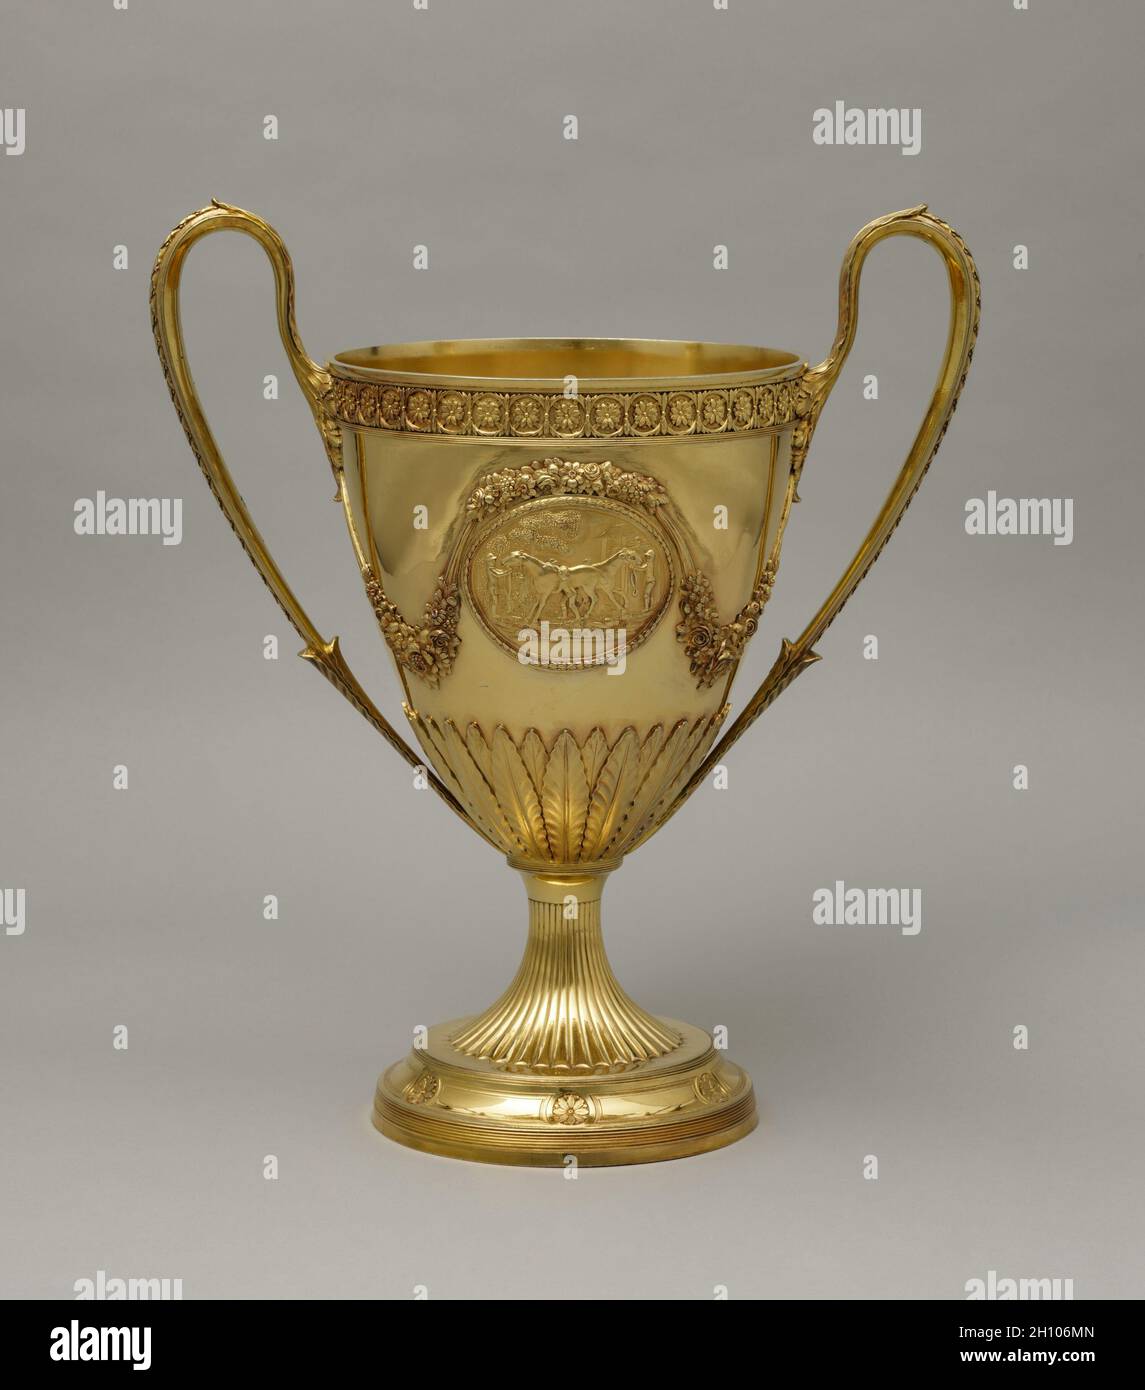 Trophy Cup, 1792–93. Peter Bateman (British, 1740-1825), Anne Bateman (British, 1748-1813). Silver gilt; overall: 59.7 x 40 cm (23 1/2 x 15 3/4 in.).  Silver fulfilled a prominent role in projecting wealth, status, power, and ritual in British life during the 1600s and 1700s. Elaborate forms such as this trophy, with its swags of flowers, neoclassical rosettes, and acanthus spears, not only represented wealth in its sheer silver weight but also provided royal and aristocratic owners a surface for displaying engraved coats of arms. Engraved on one side of this trophy cup can be found the arms o Stock Photo